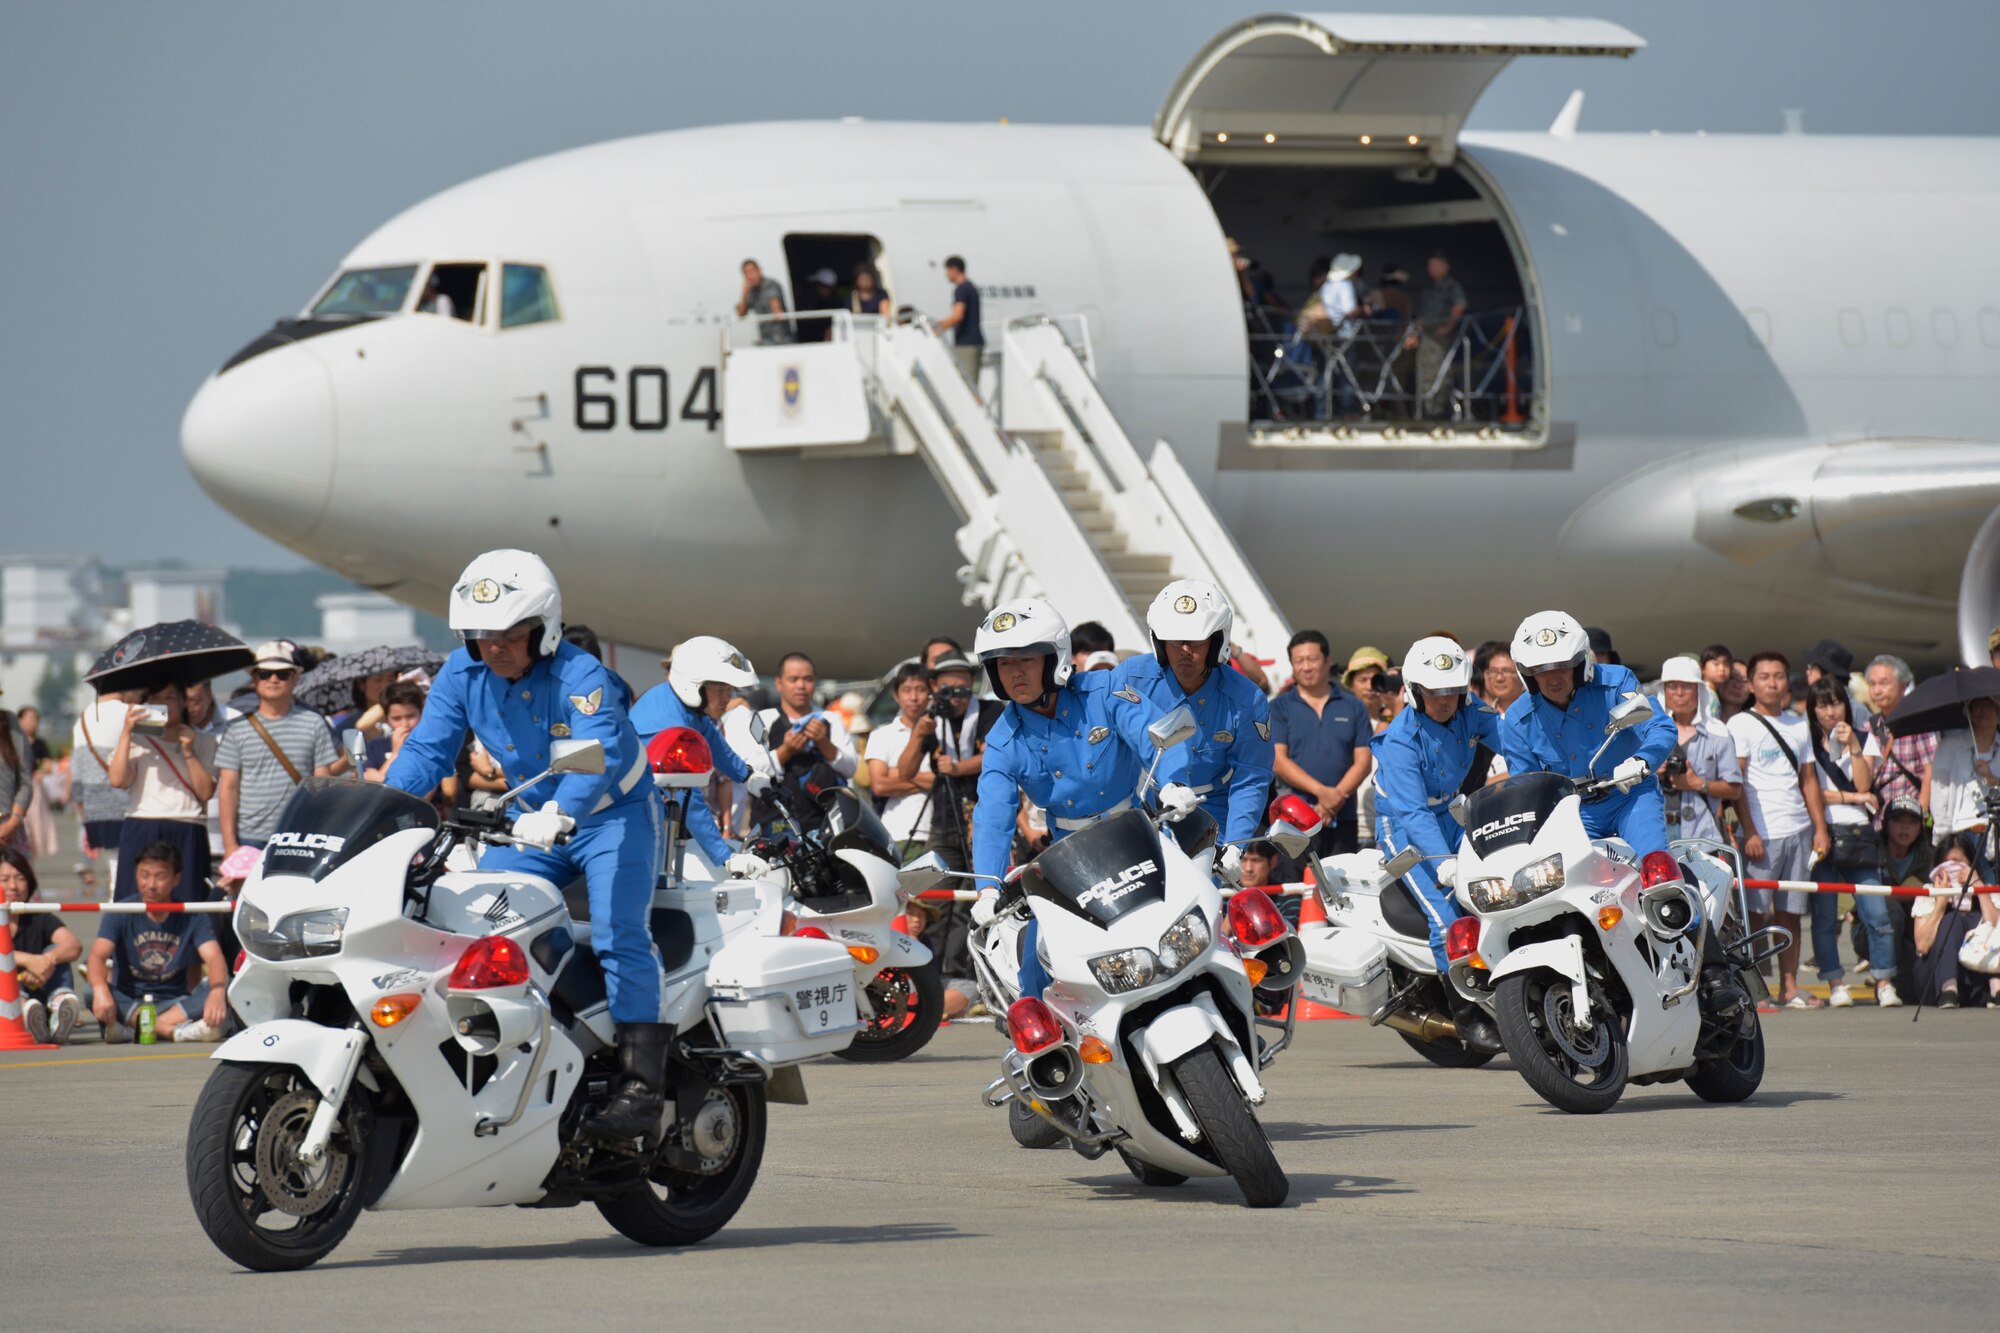 Members of the Tokyo Metropolitan Police Department 9th district traffic mobile unit conduct their motorcycle demonstration during the 2016 Friendship Festival at Yokota Air Base, Japan, Sept. 17, 2016. The festival hosted food vendors, static aircraft displays, live entertainment and military and government demonstrations. (U.S. Air Force photo by Machiko Imai/Released)